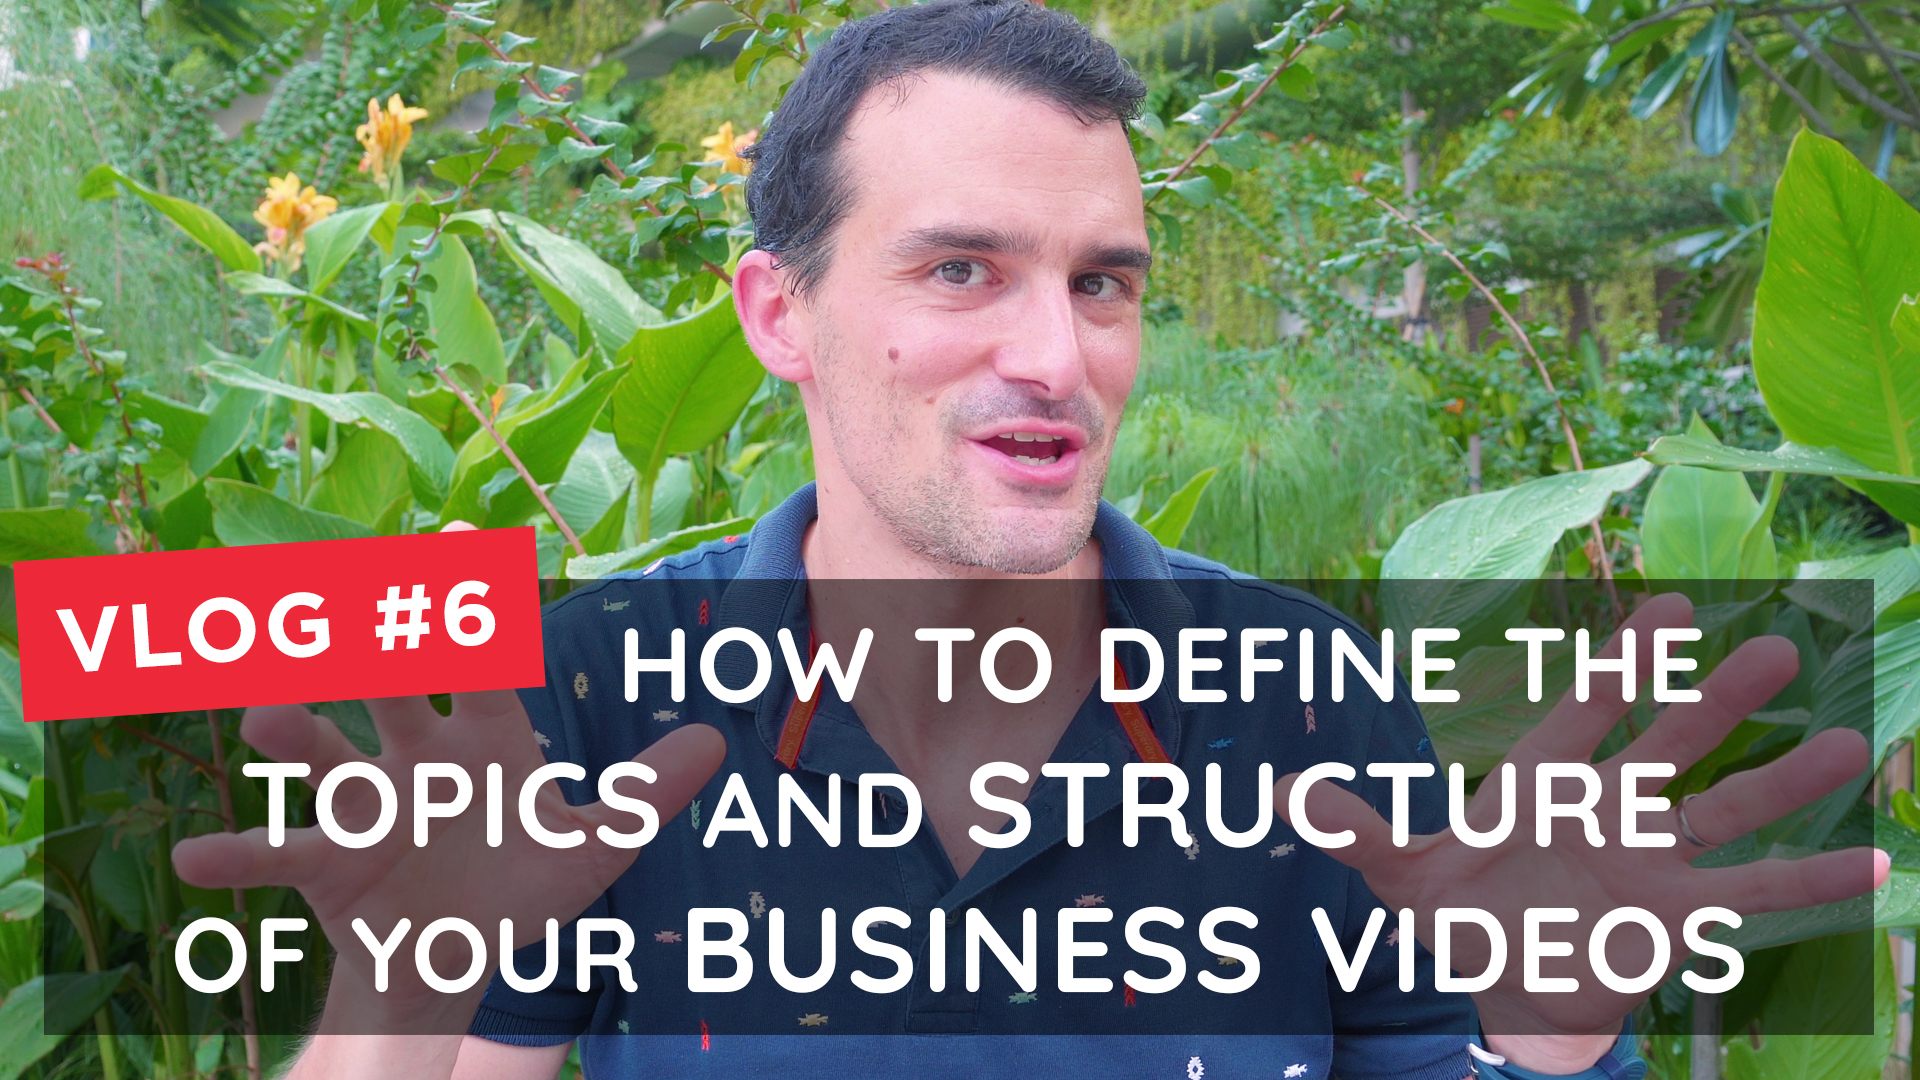 How to define the topics and structure of your business videos